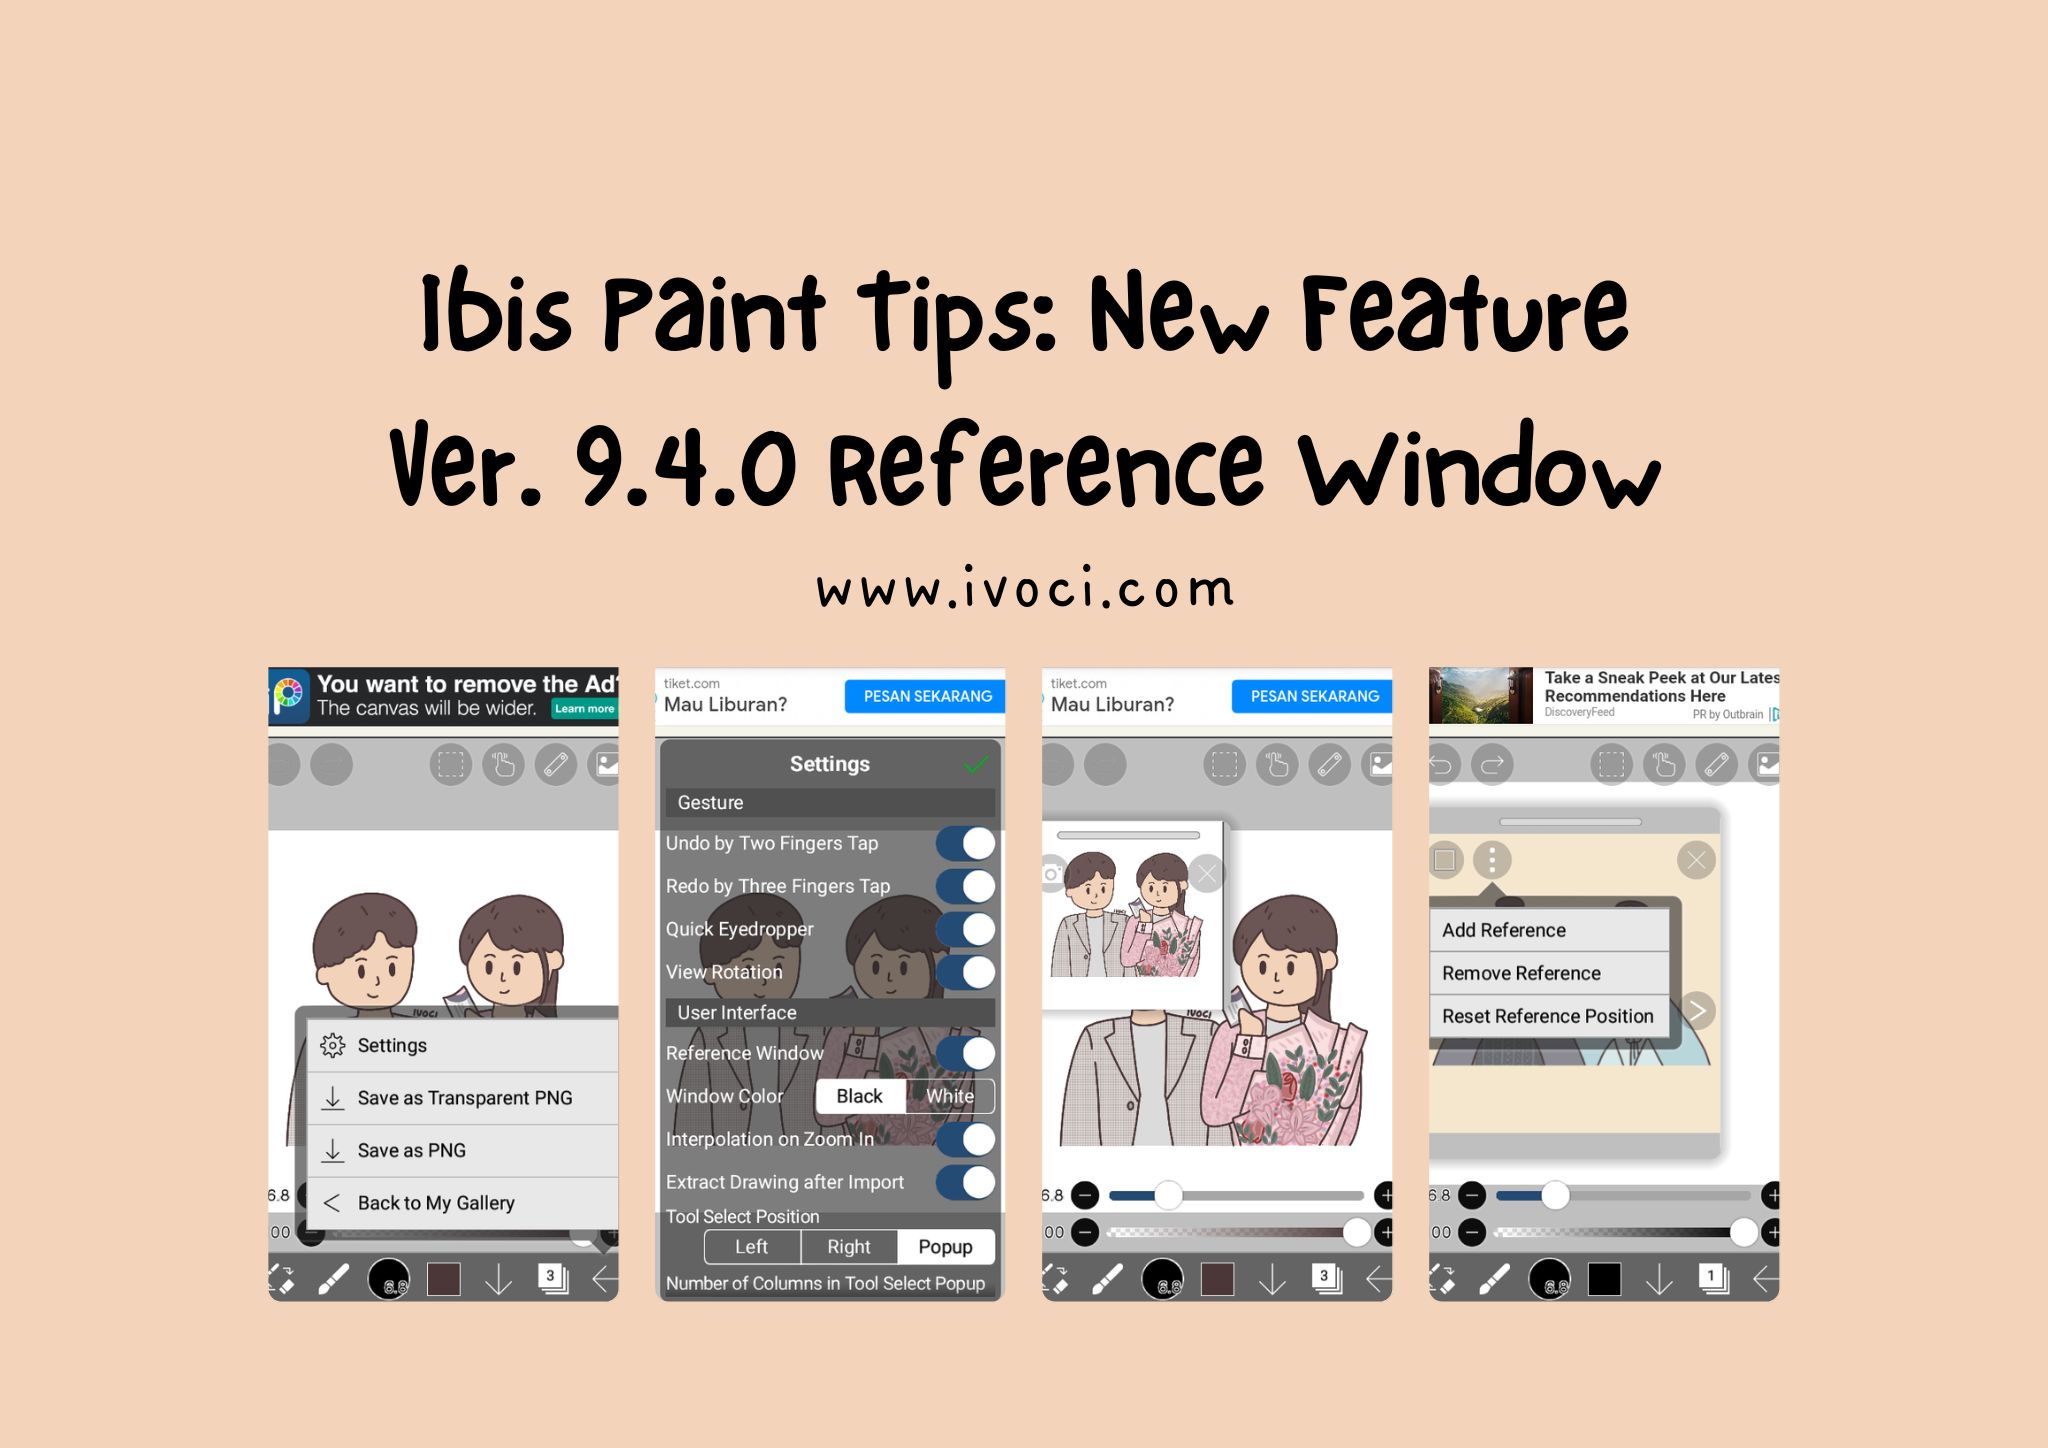 ivoci - Ibis Paint Tips: New Feature Ver. 9.4.0 Reference Window - 1